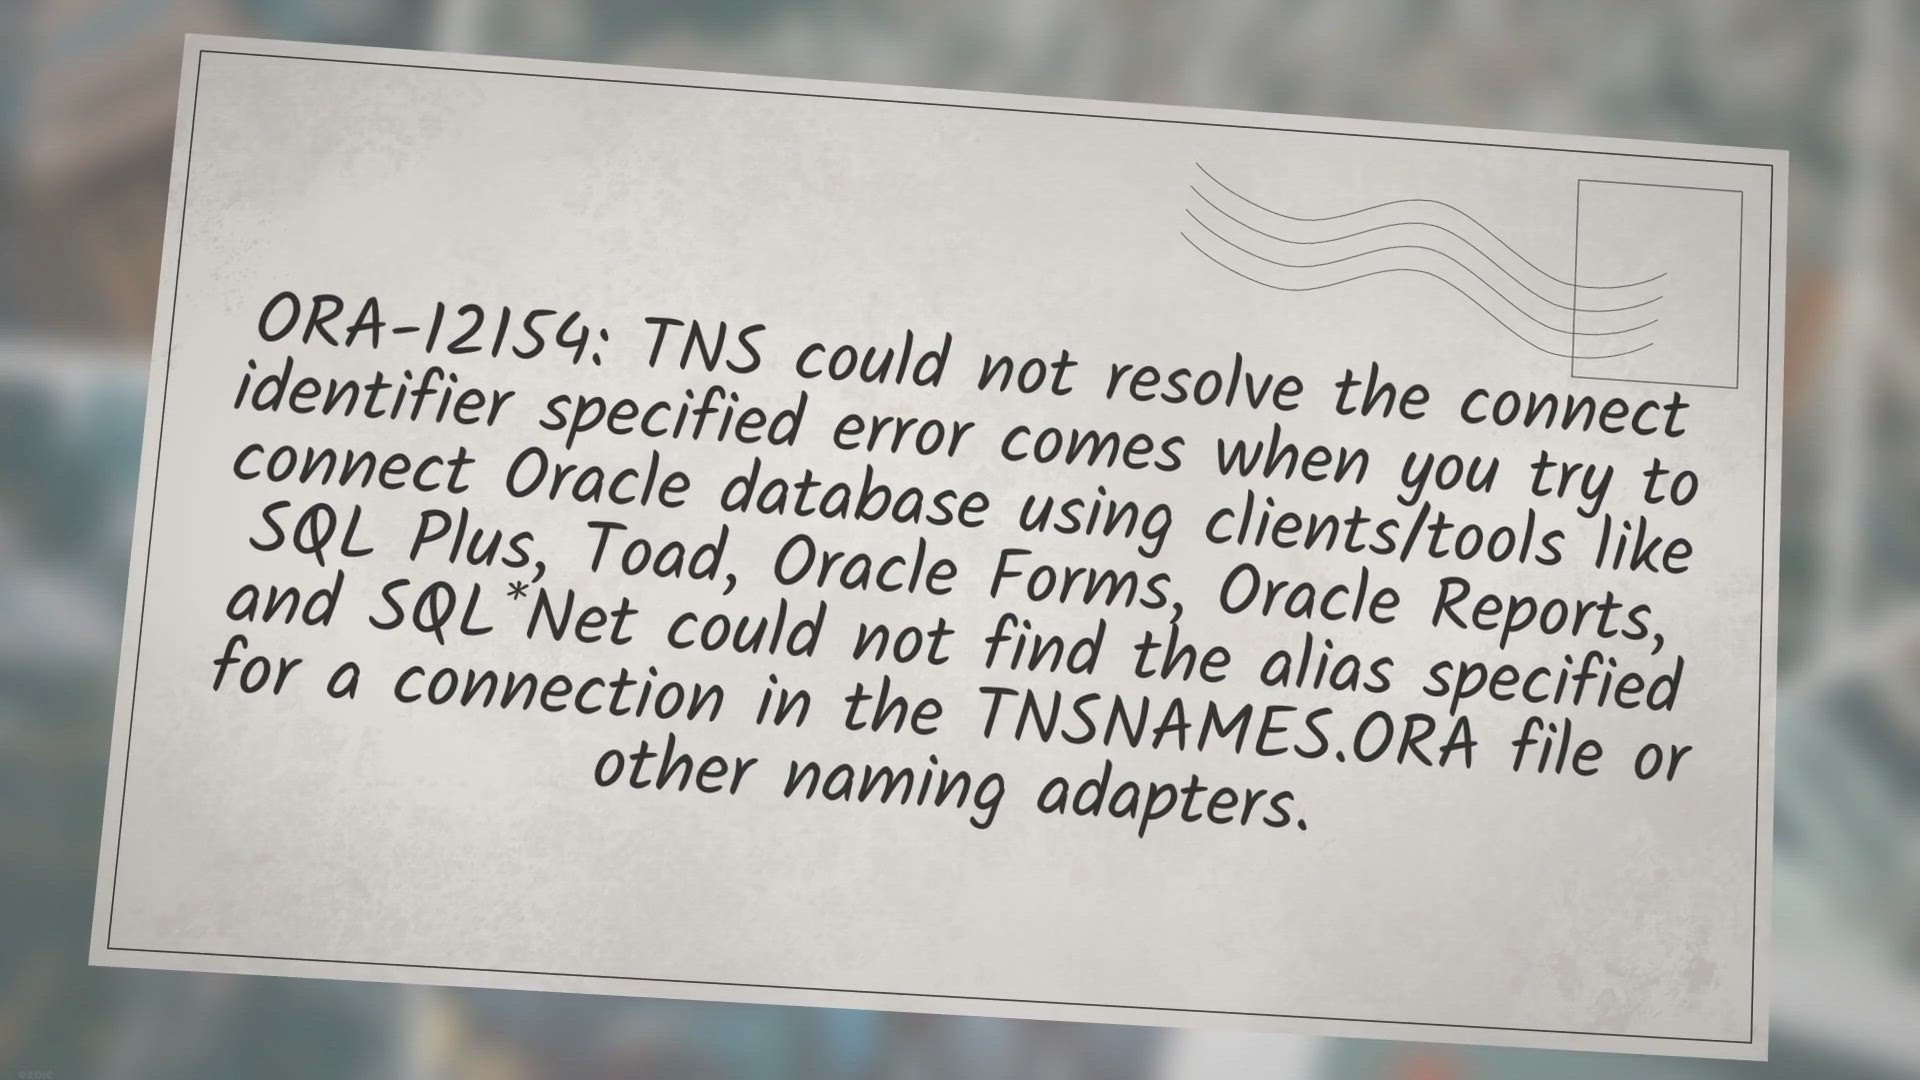 Ora-12154: Tns Could Not Resolve The Connect Identifier Specified